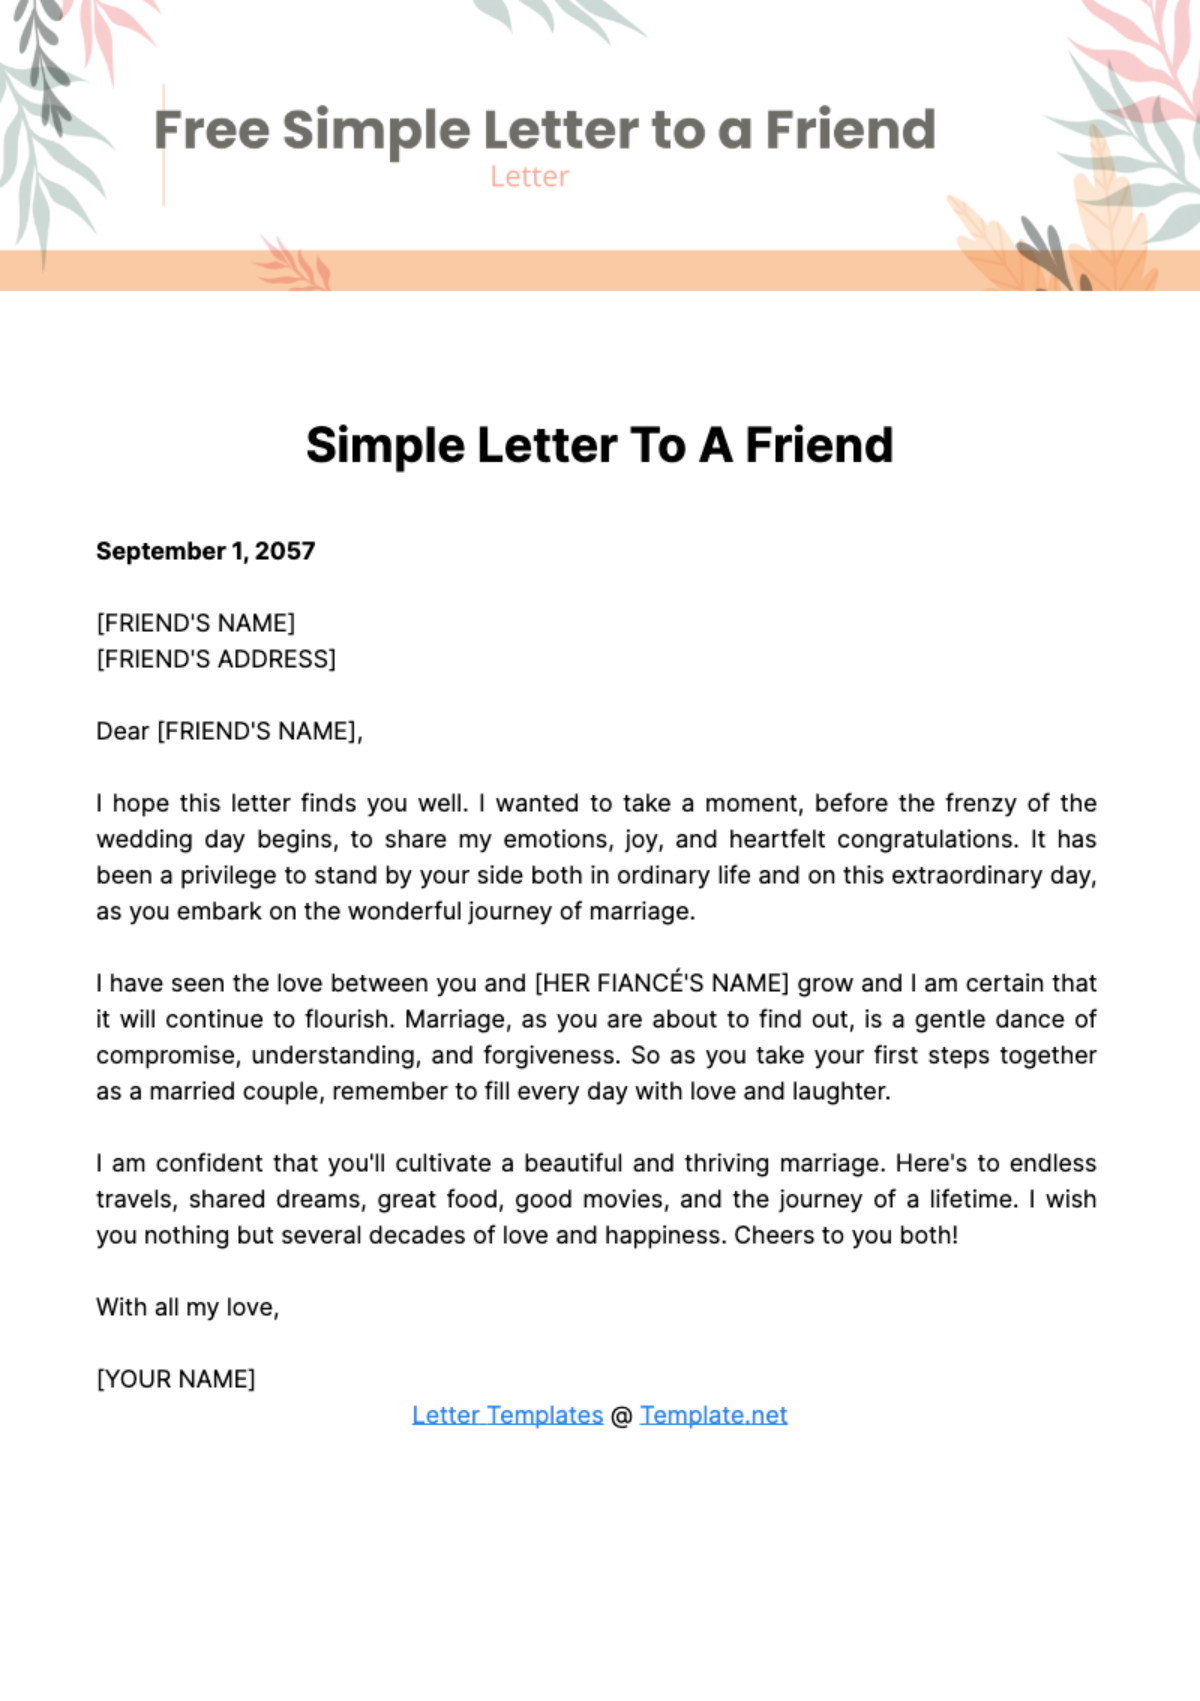 Simple Letter to a Friend Template